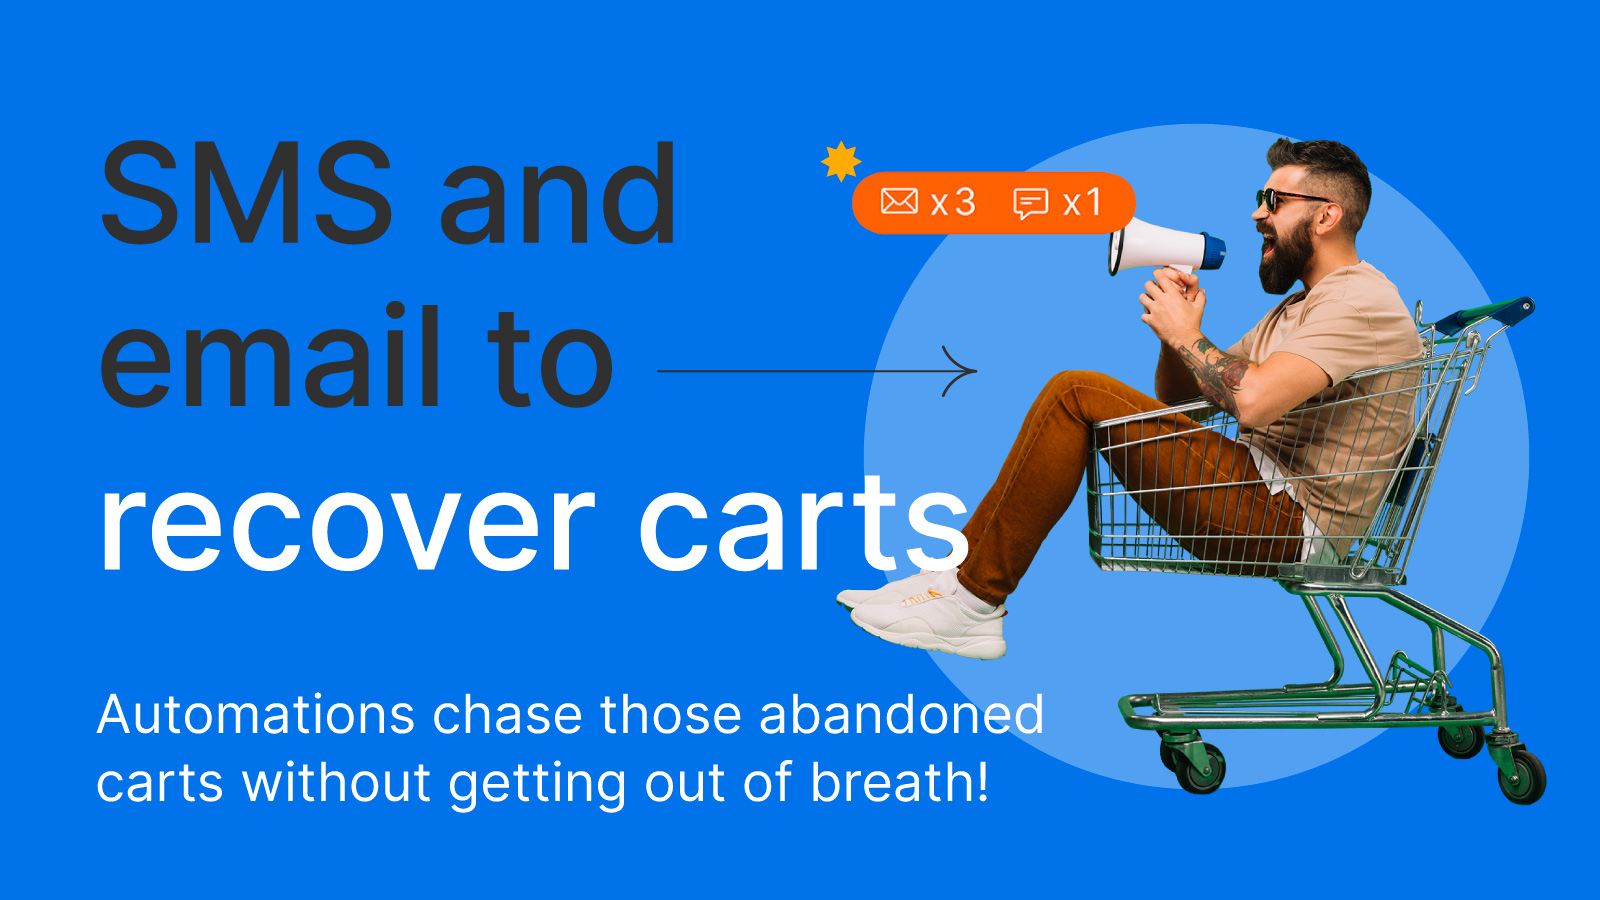 Set up automatic abandoned cart recovery emails and SMS